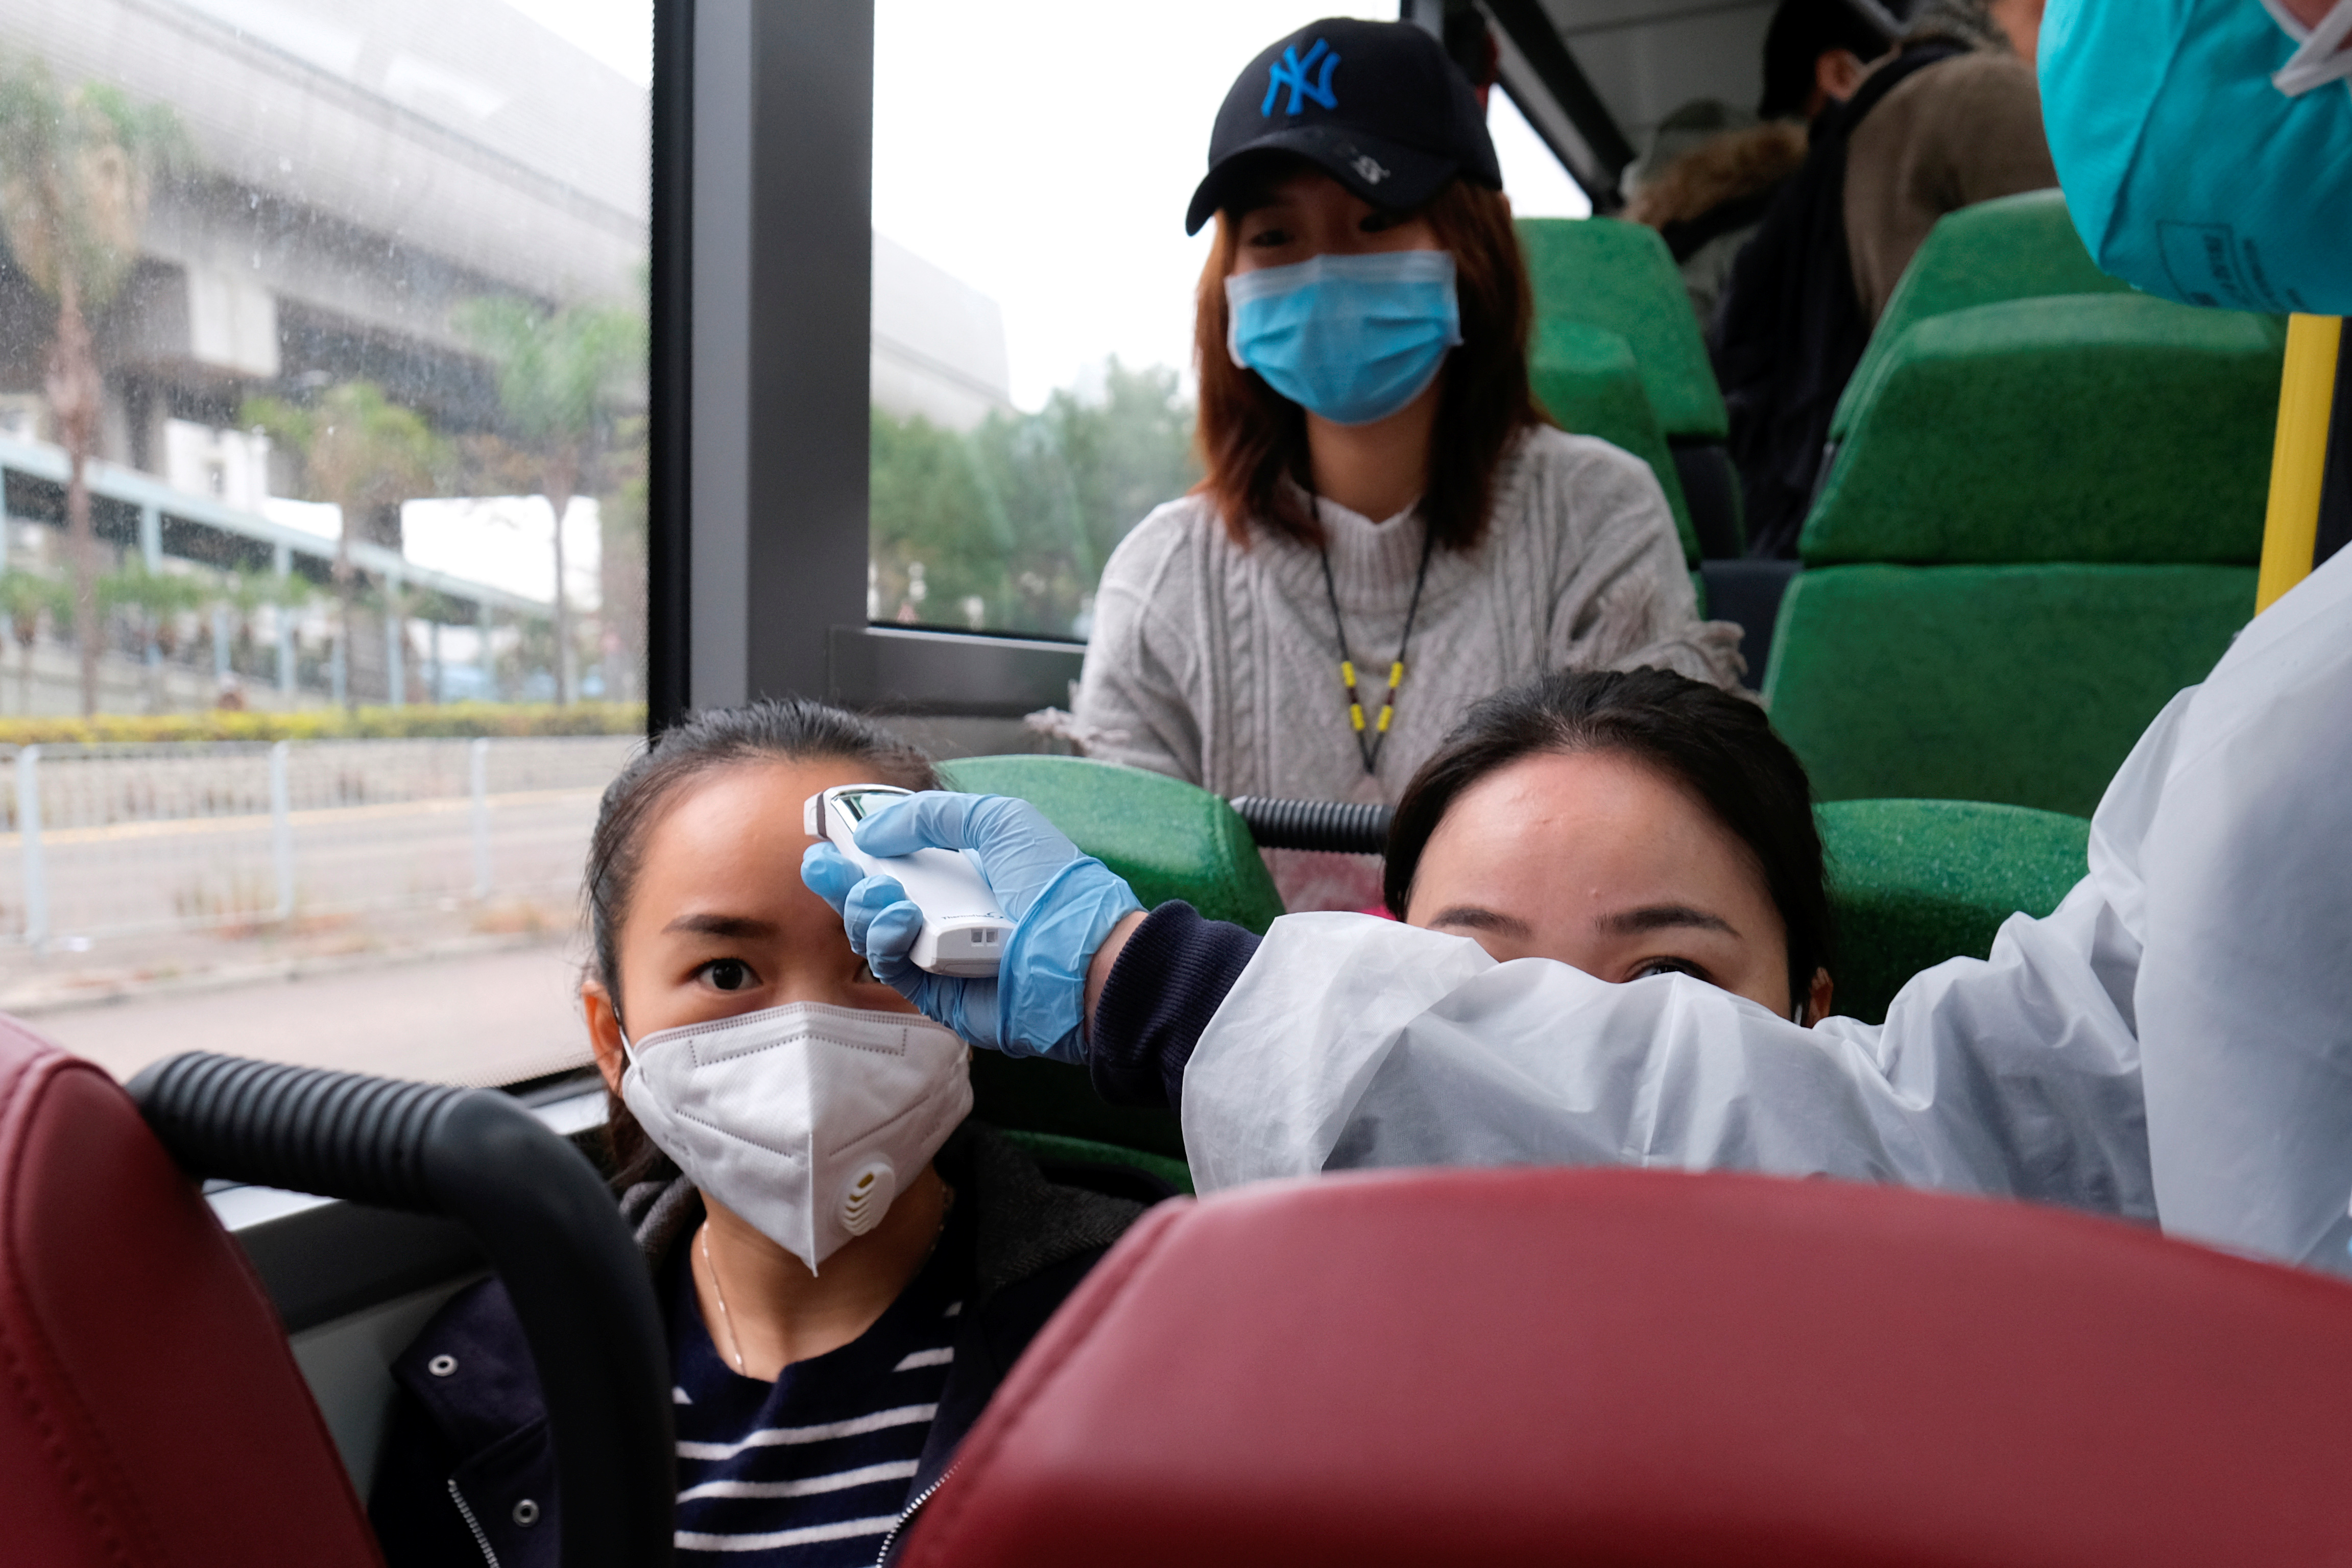 A resident wearing mask and raincoat volunteers to take temperature of passenger following the outbreak of a new coronavirus at a bus stop at Tin Shui Wai, a border town in Hong Kong